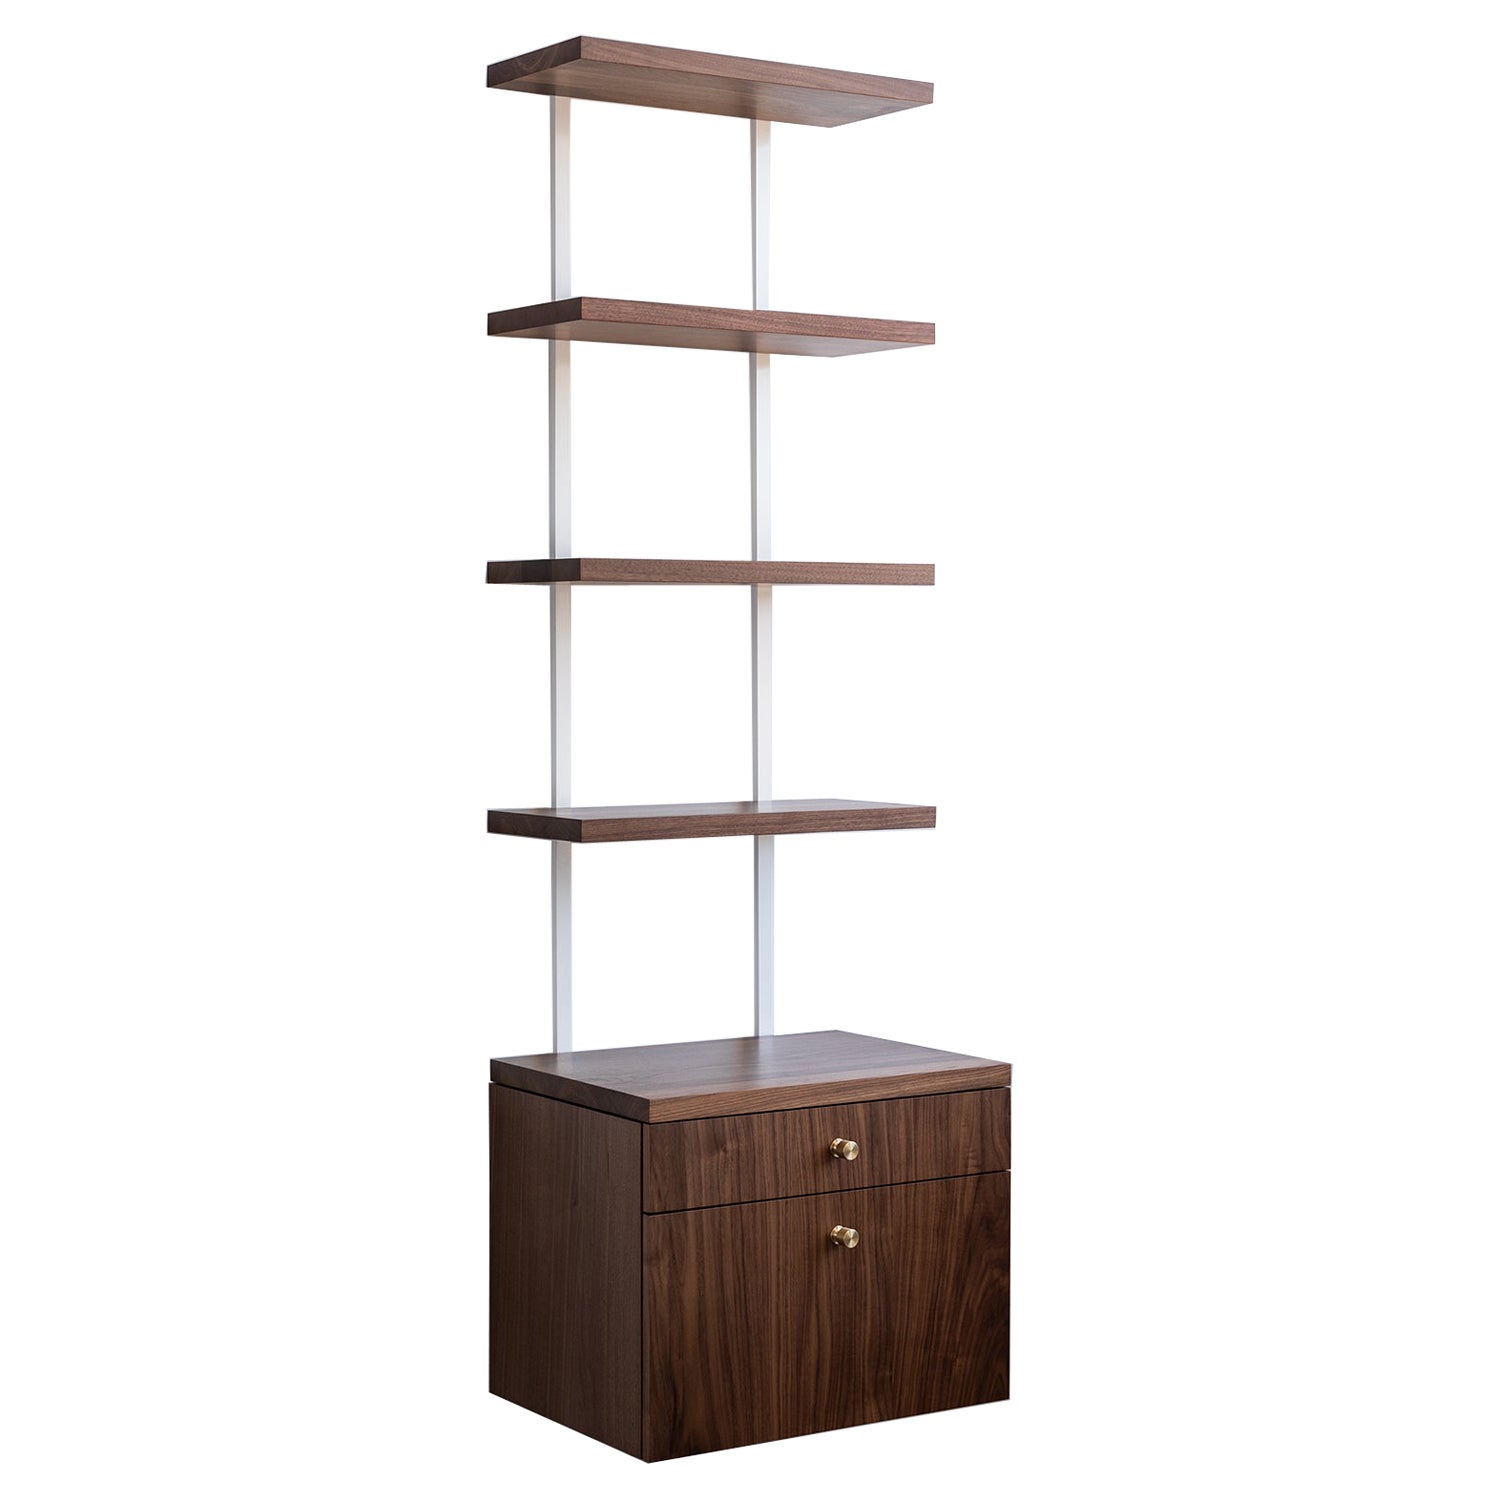 AS6 wall unit 24" wide shelves & drawer cabinet in solid walnut